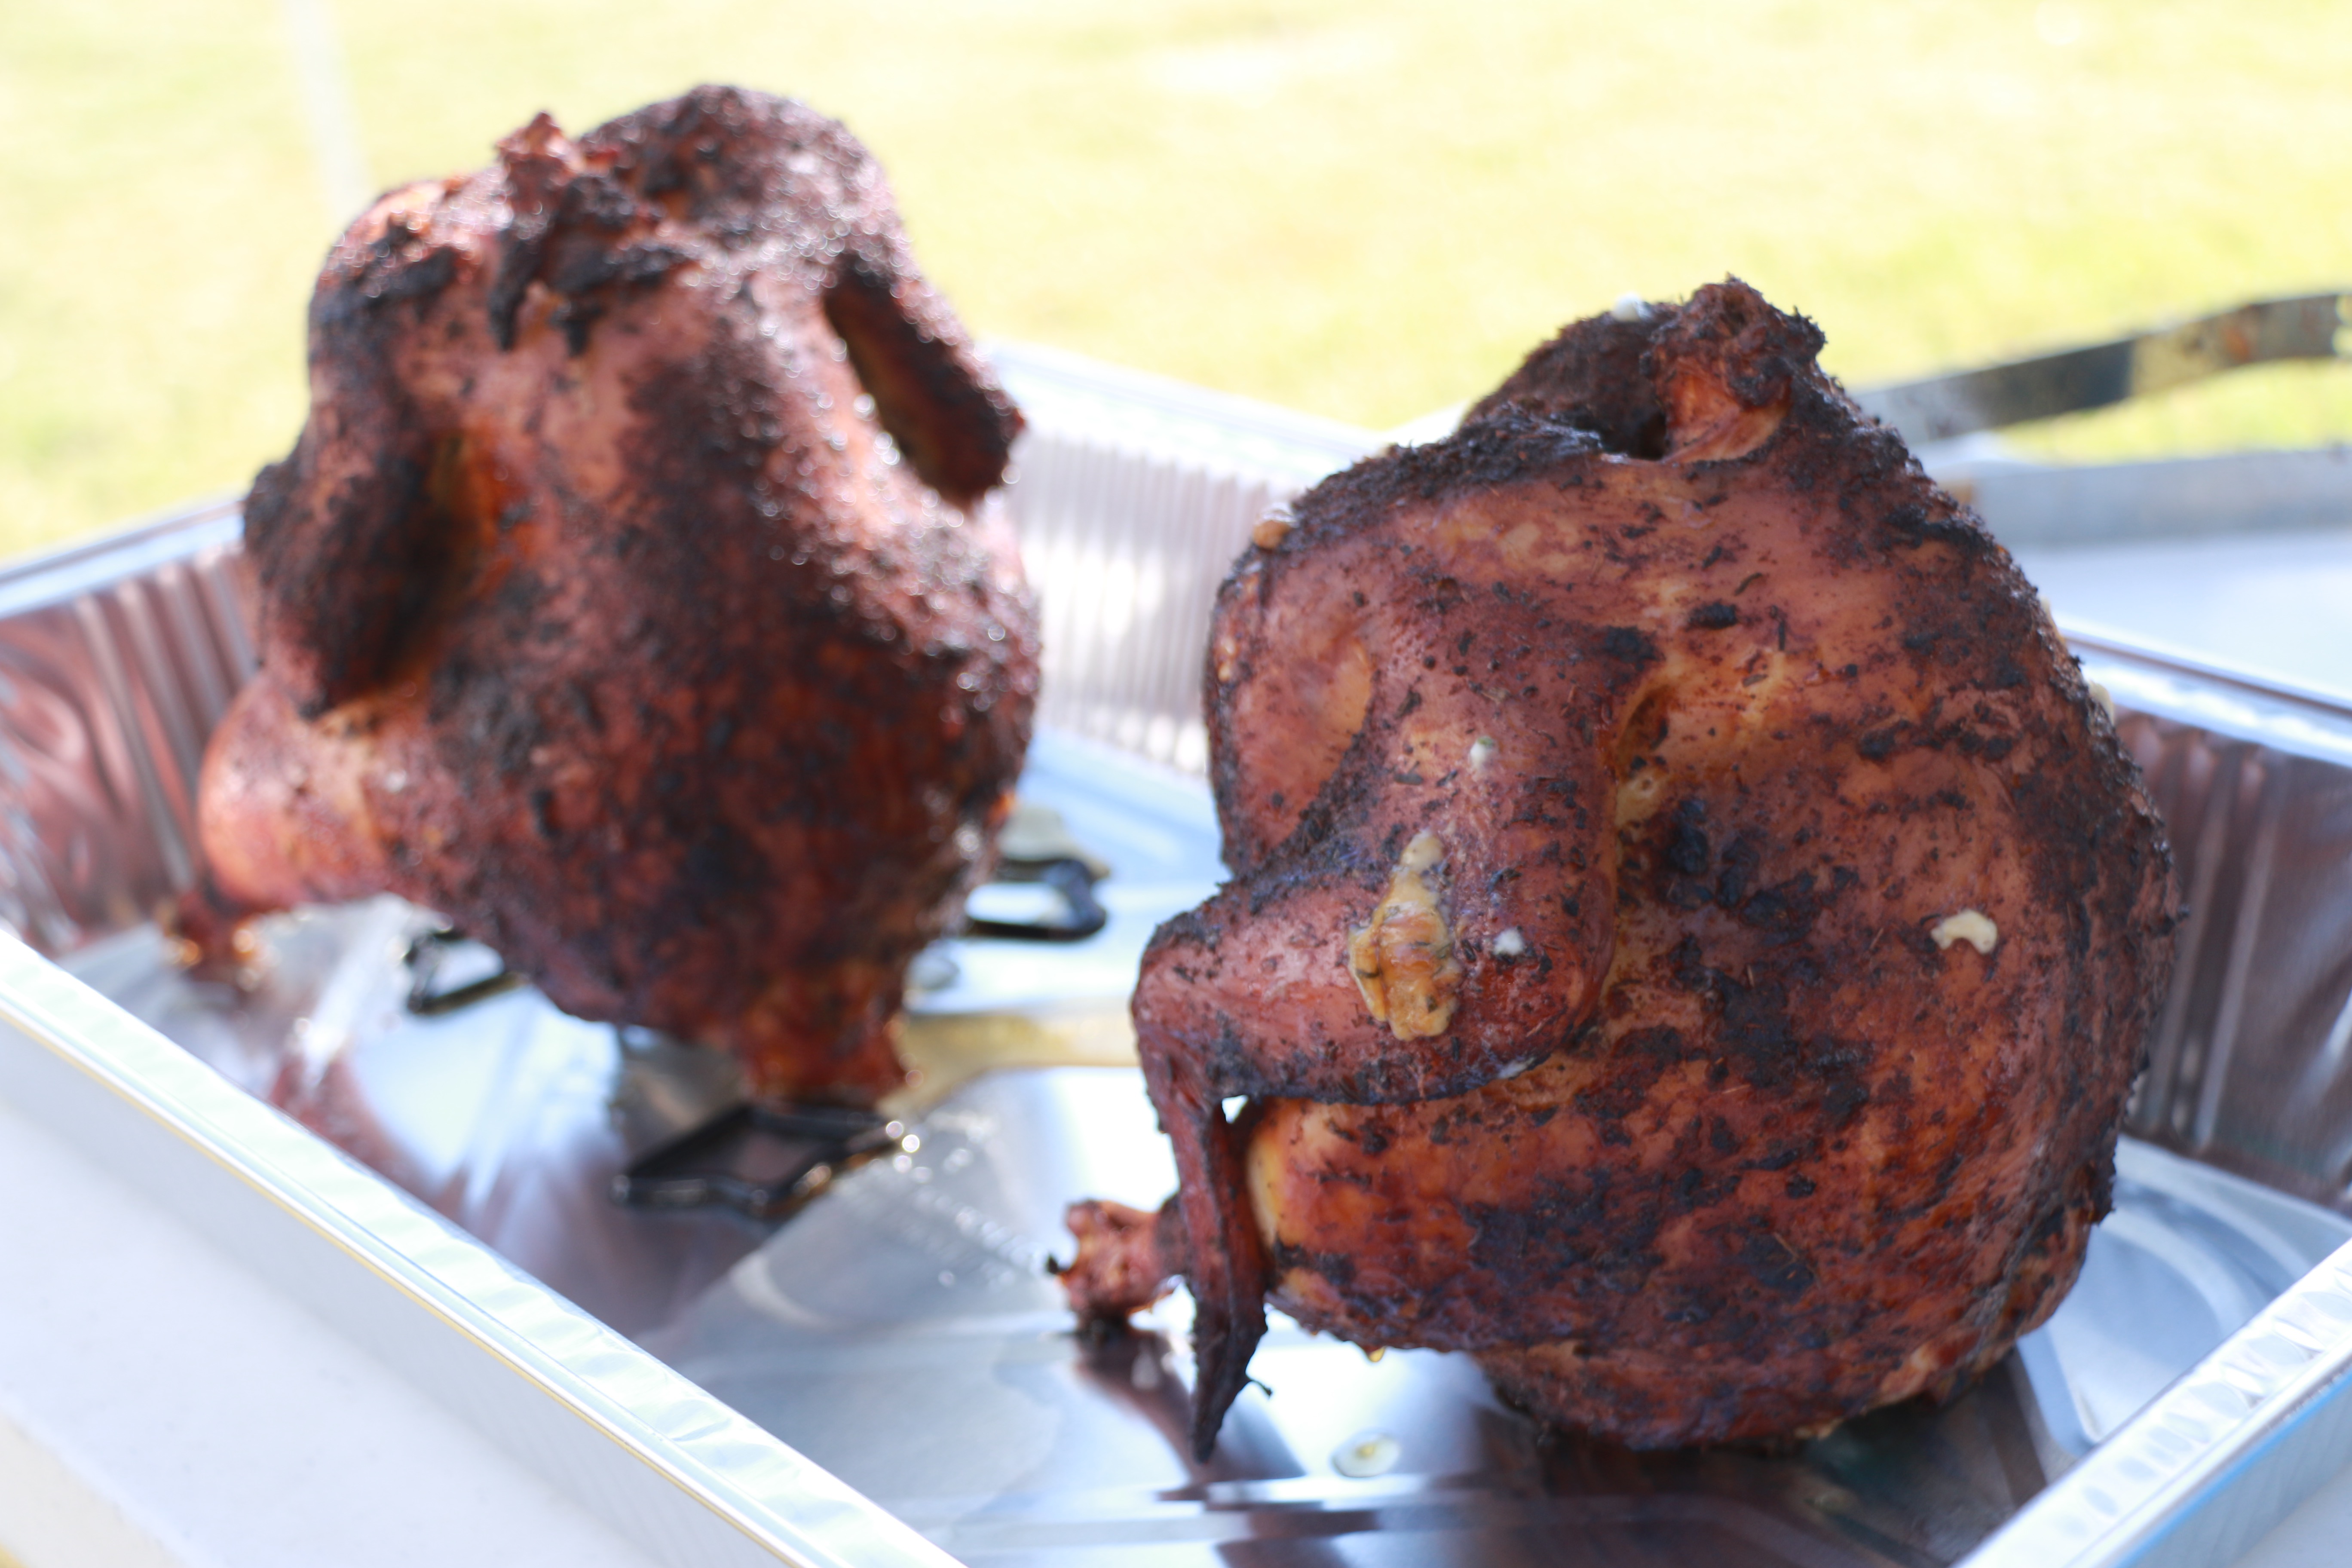 Ginger ale-can smoked chicken